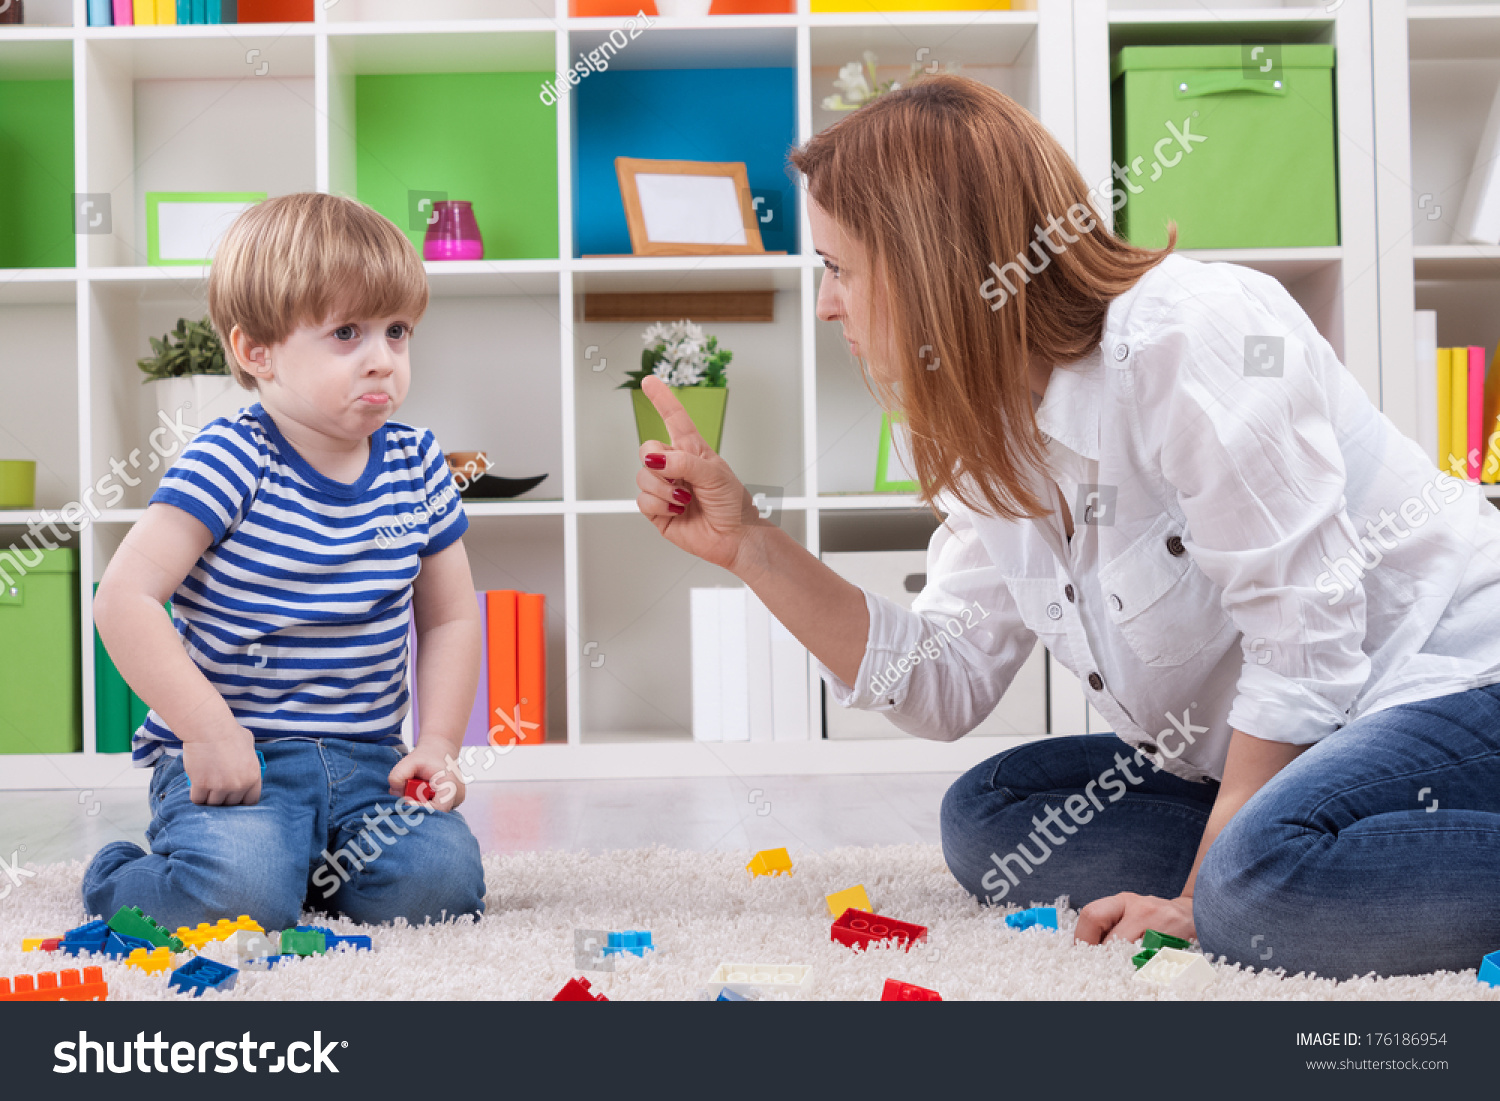 Angry mother scolding a disobedient child #176186954